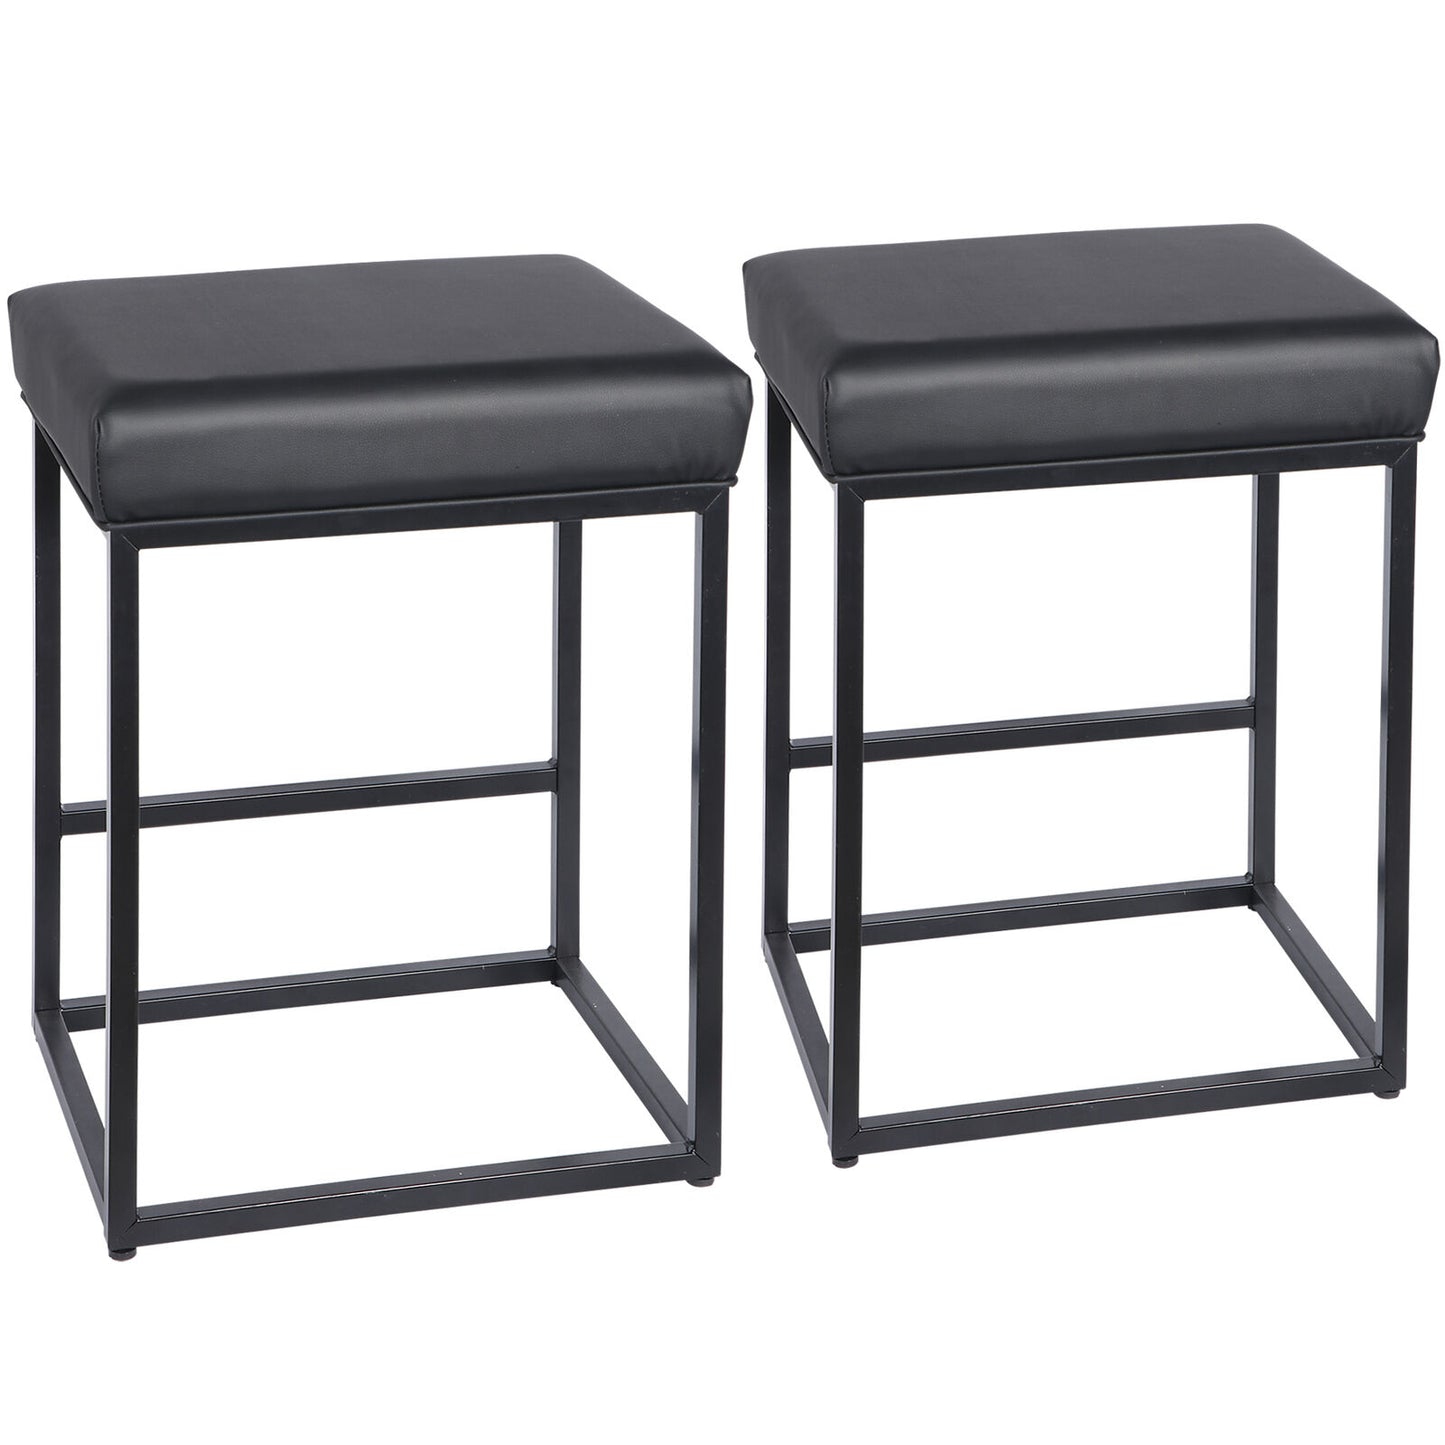 24" Set of 2 Counter Stools & Bar Stools Backless PU Leather With Footrest Black